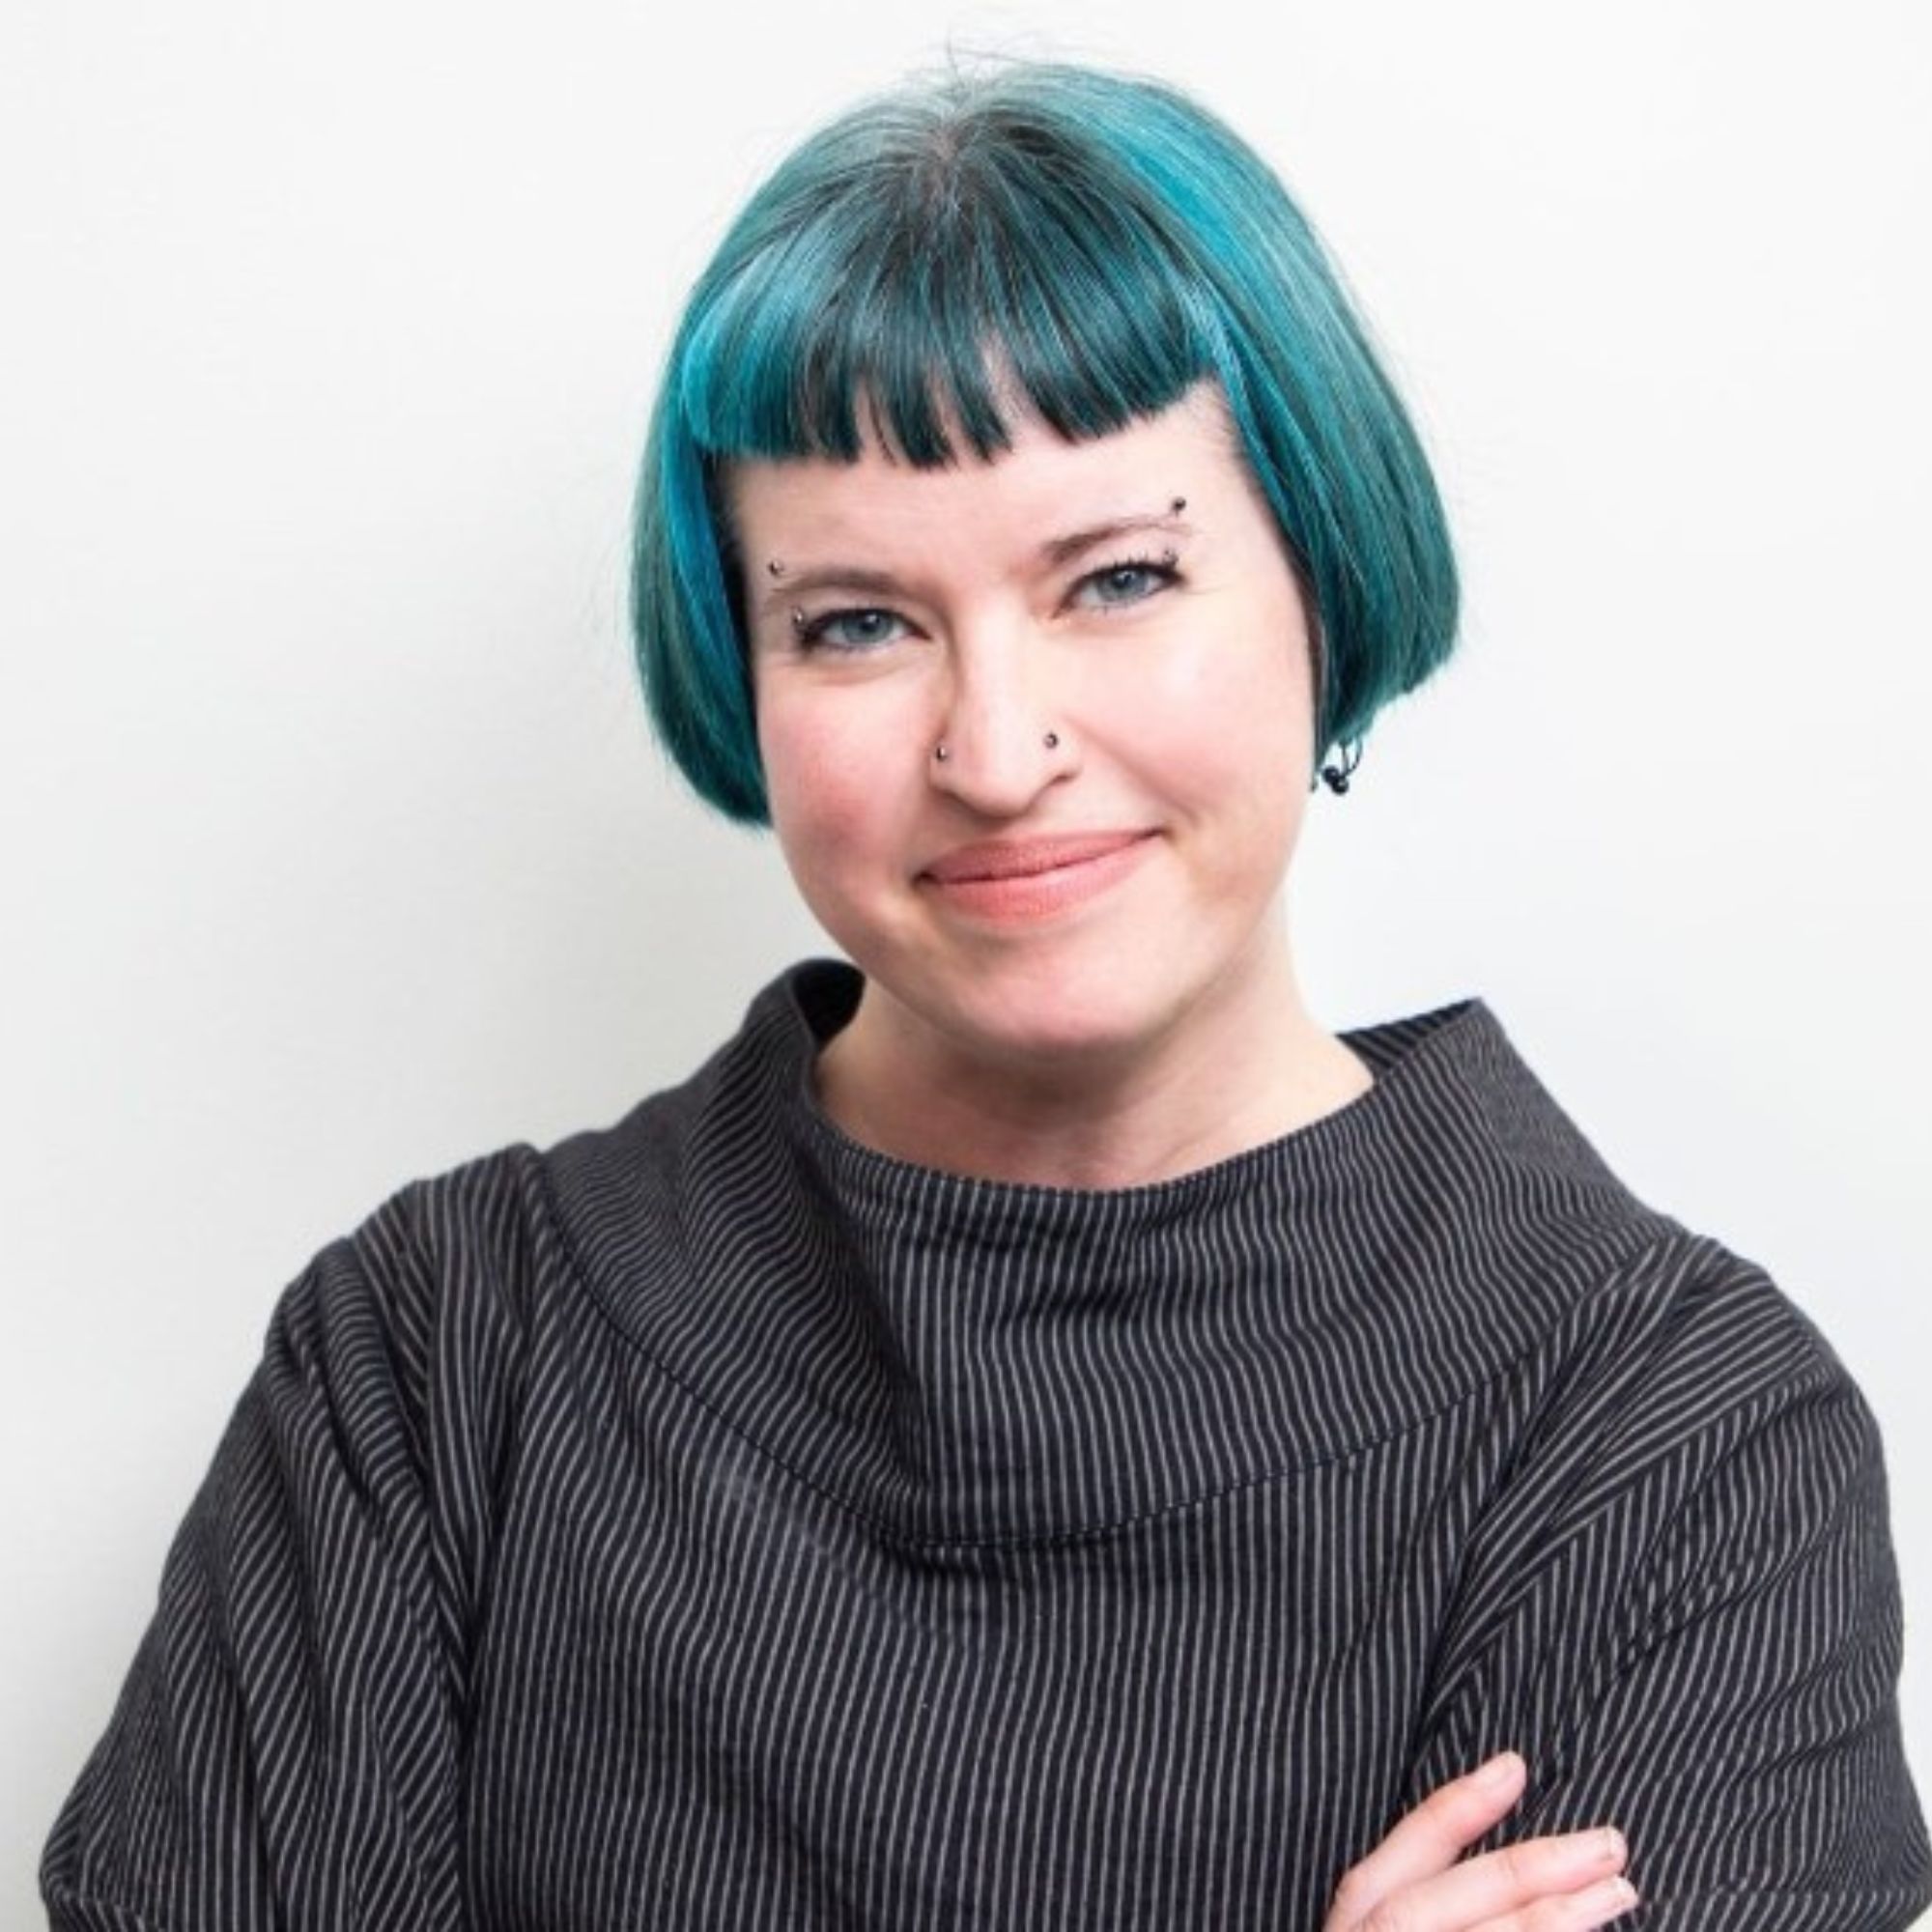 A picture of Rachel Waldron, a woman with a blue bob wearing a gray jumper against a white background